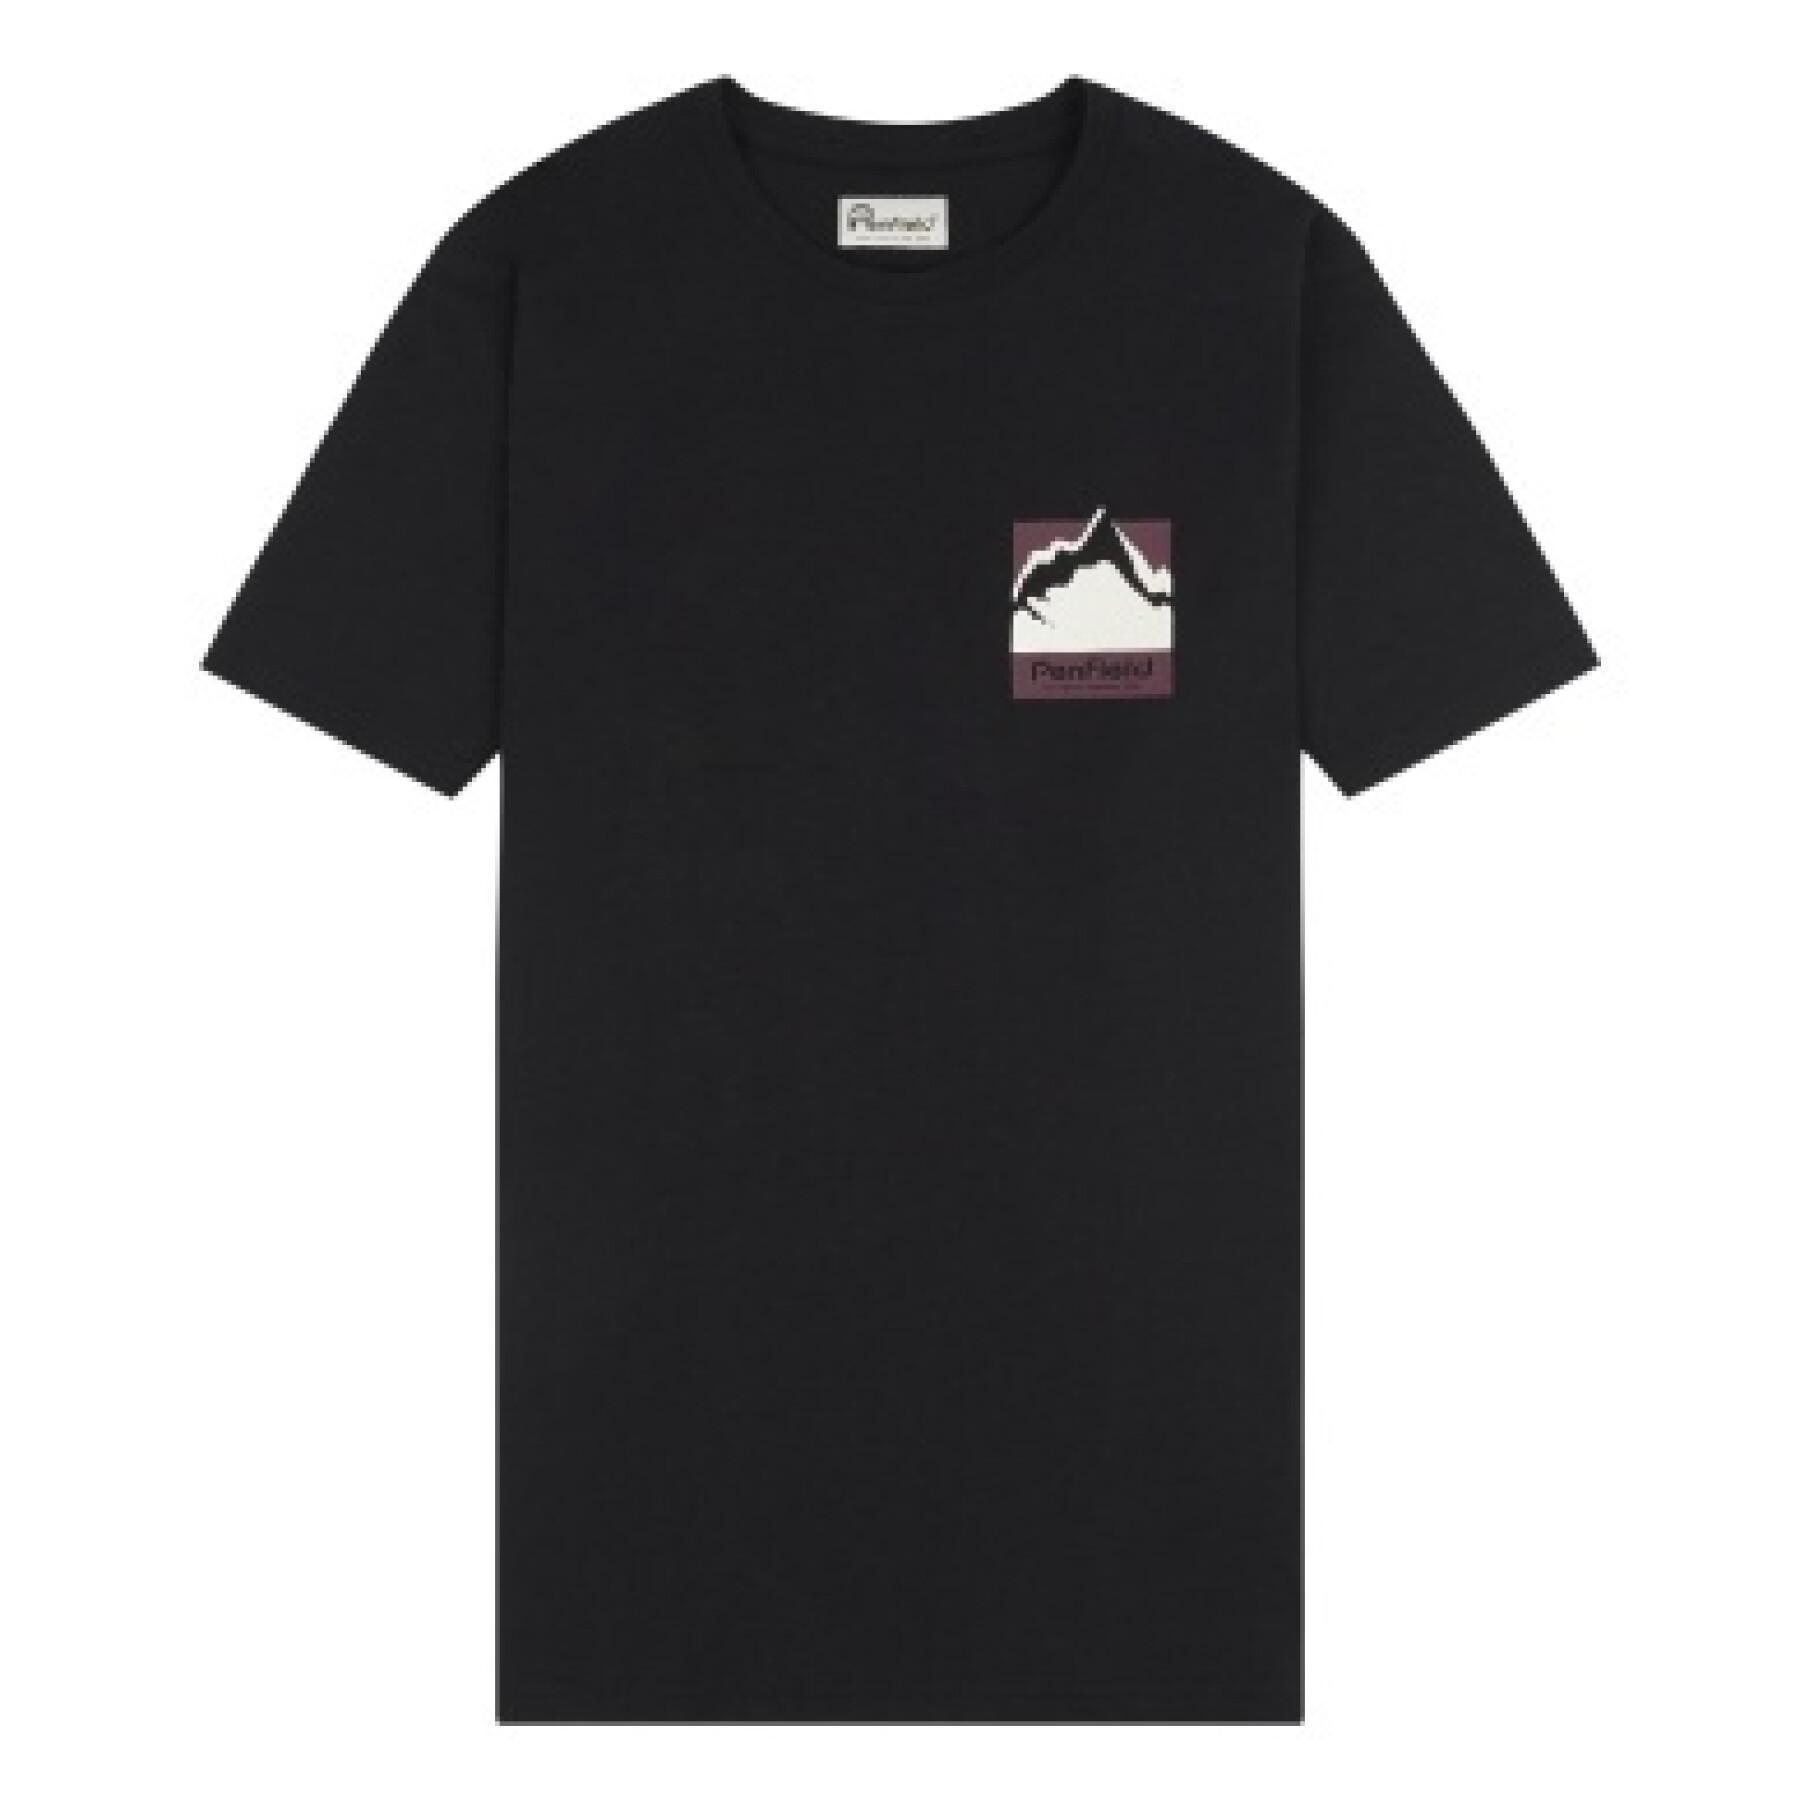 T-shirt Penfield back graphic